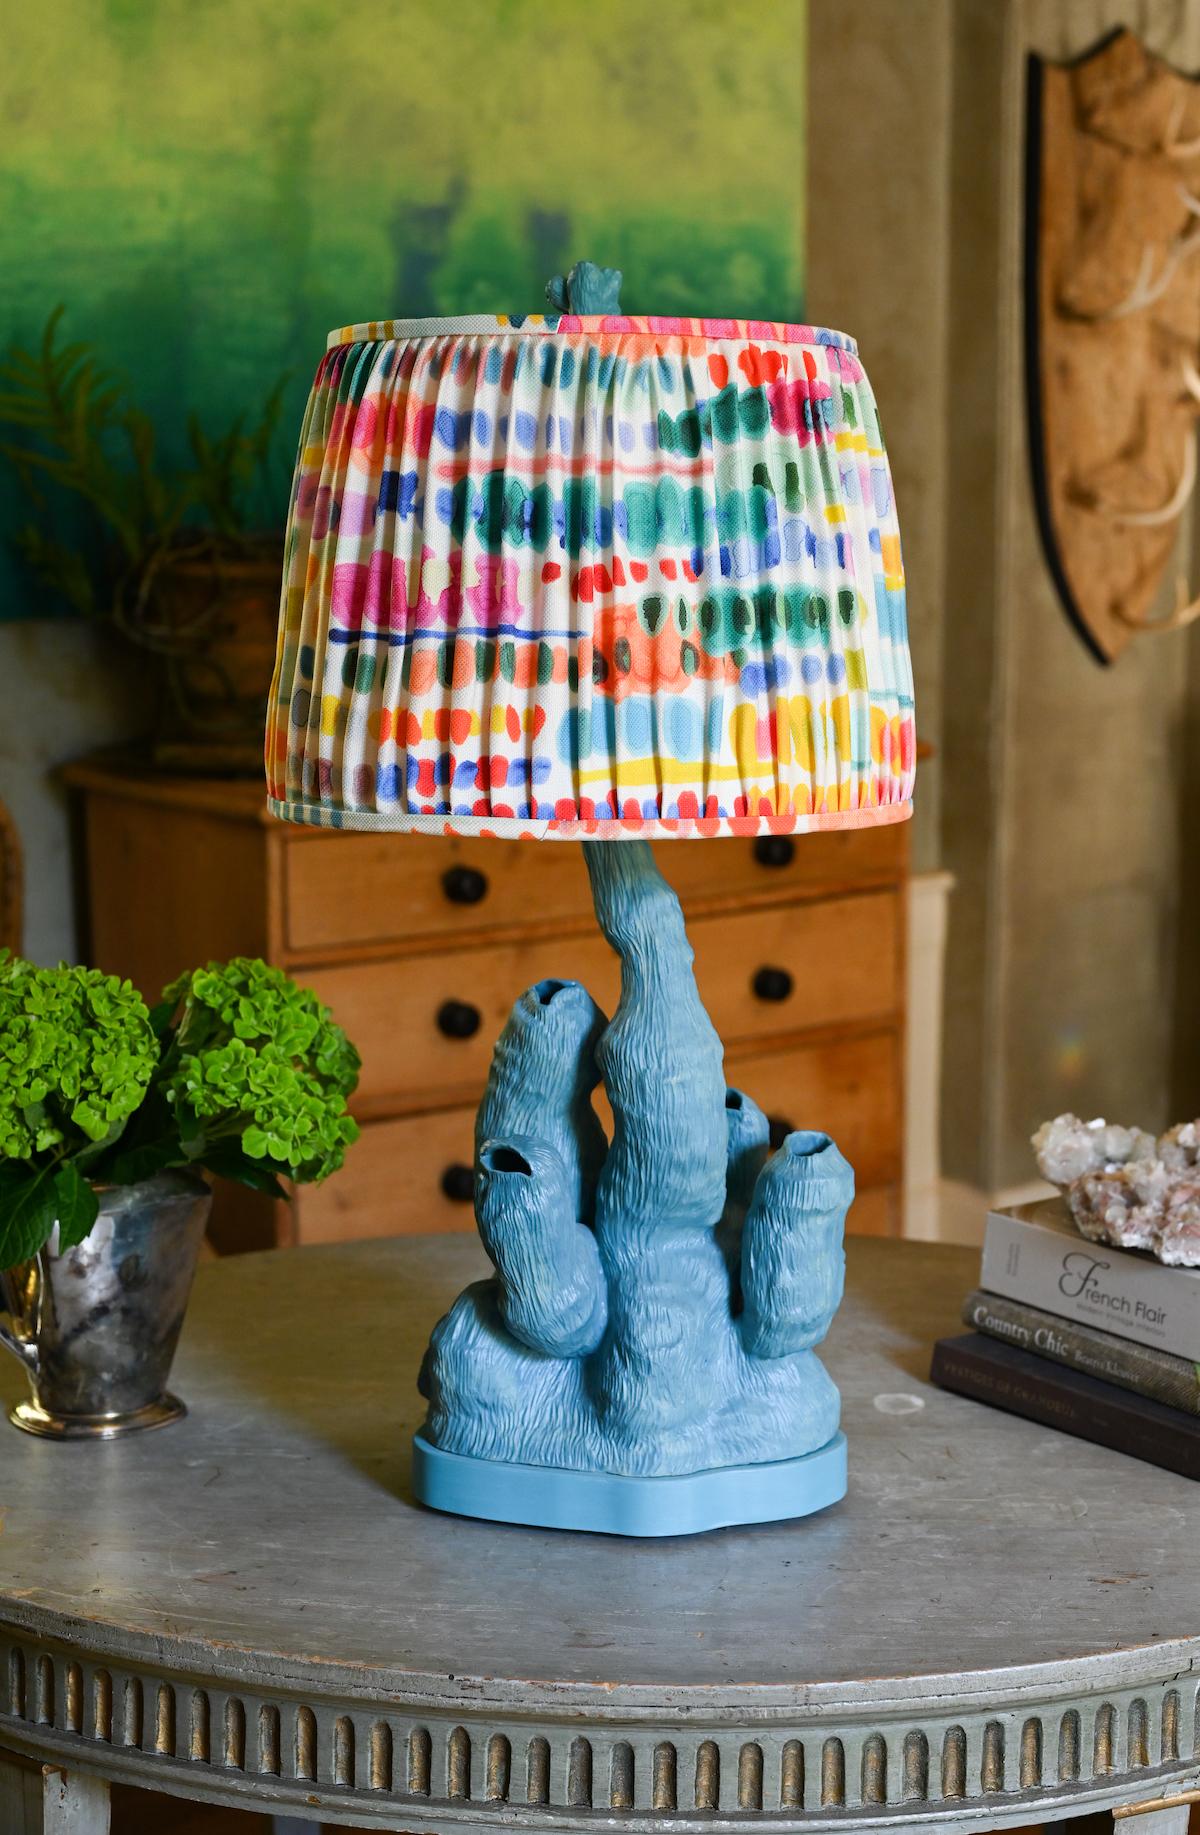 Contemporary ceramic studio made coral form lamp in turquoise. The lamp surface is carved to create a rich texture and under-glazed in a soft-matte to semi finish. The base is custom made and painted, and all hardware is live unfinished brass.

The